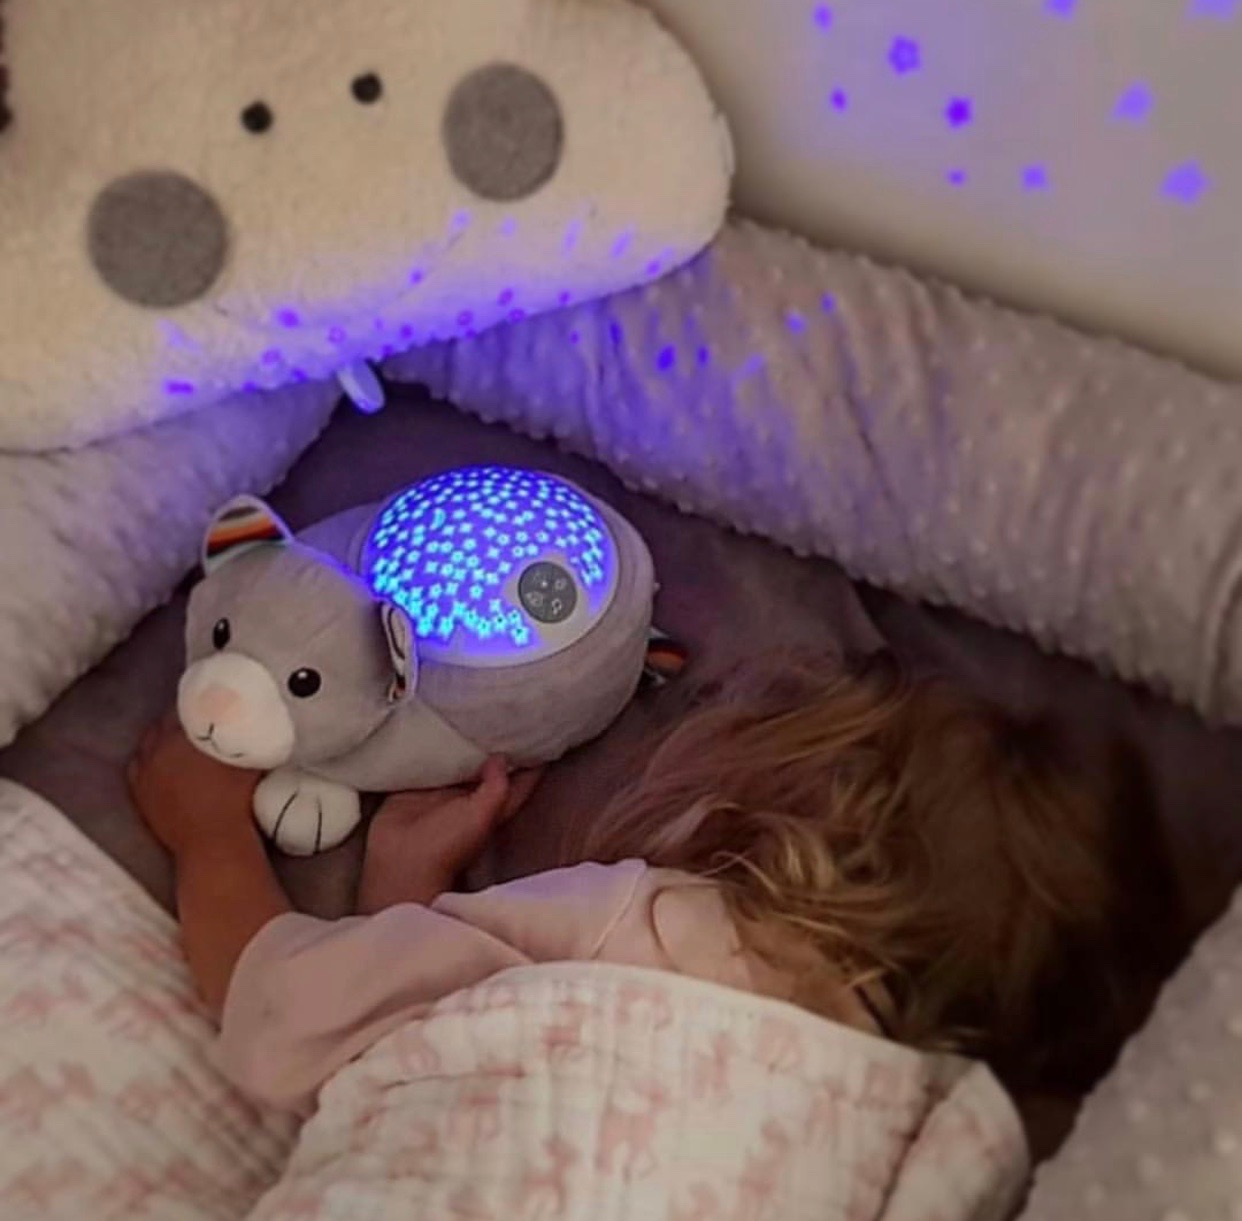 Kiki the star projector turns your nursery into a magical place